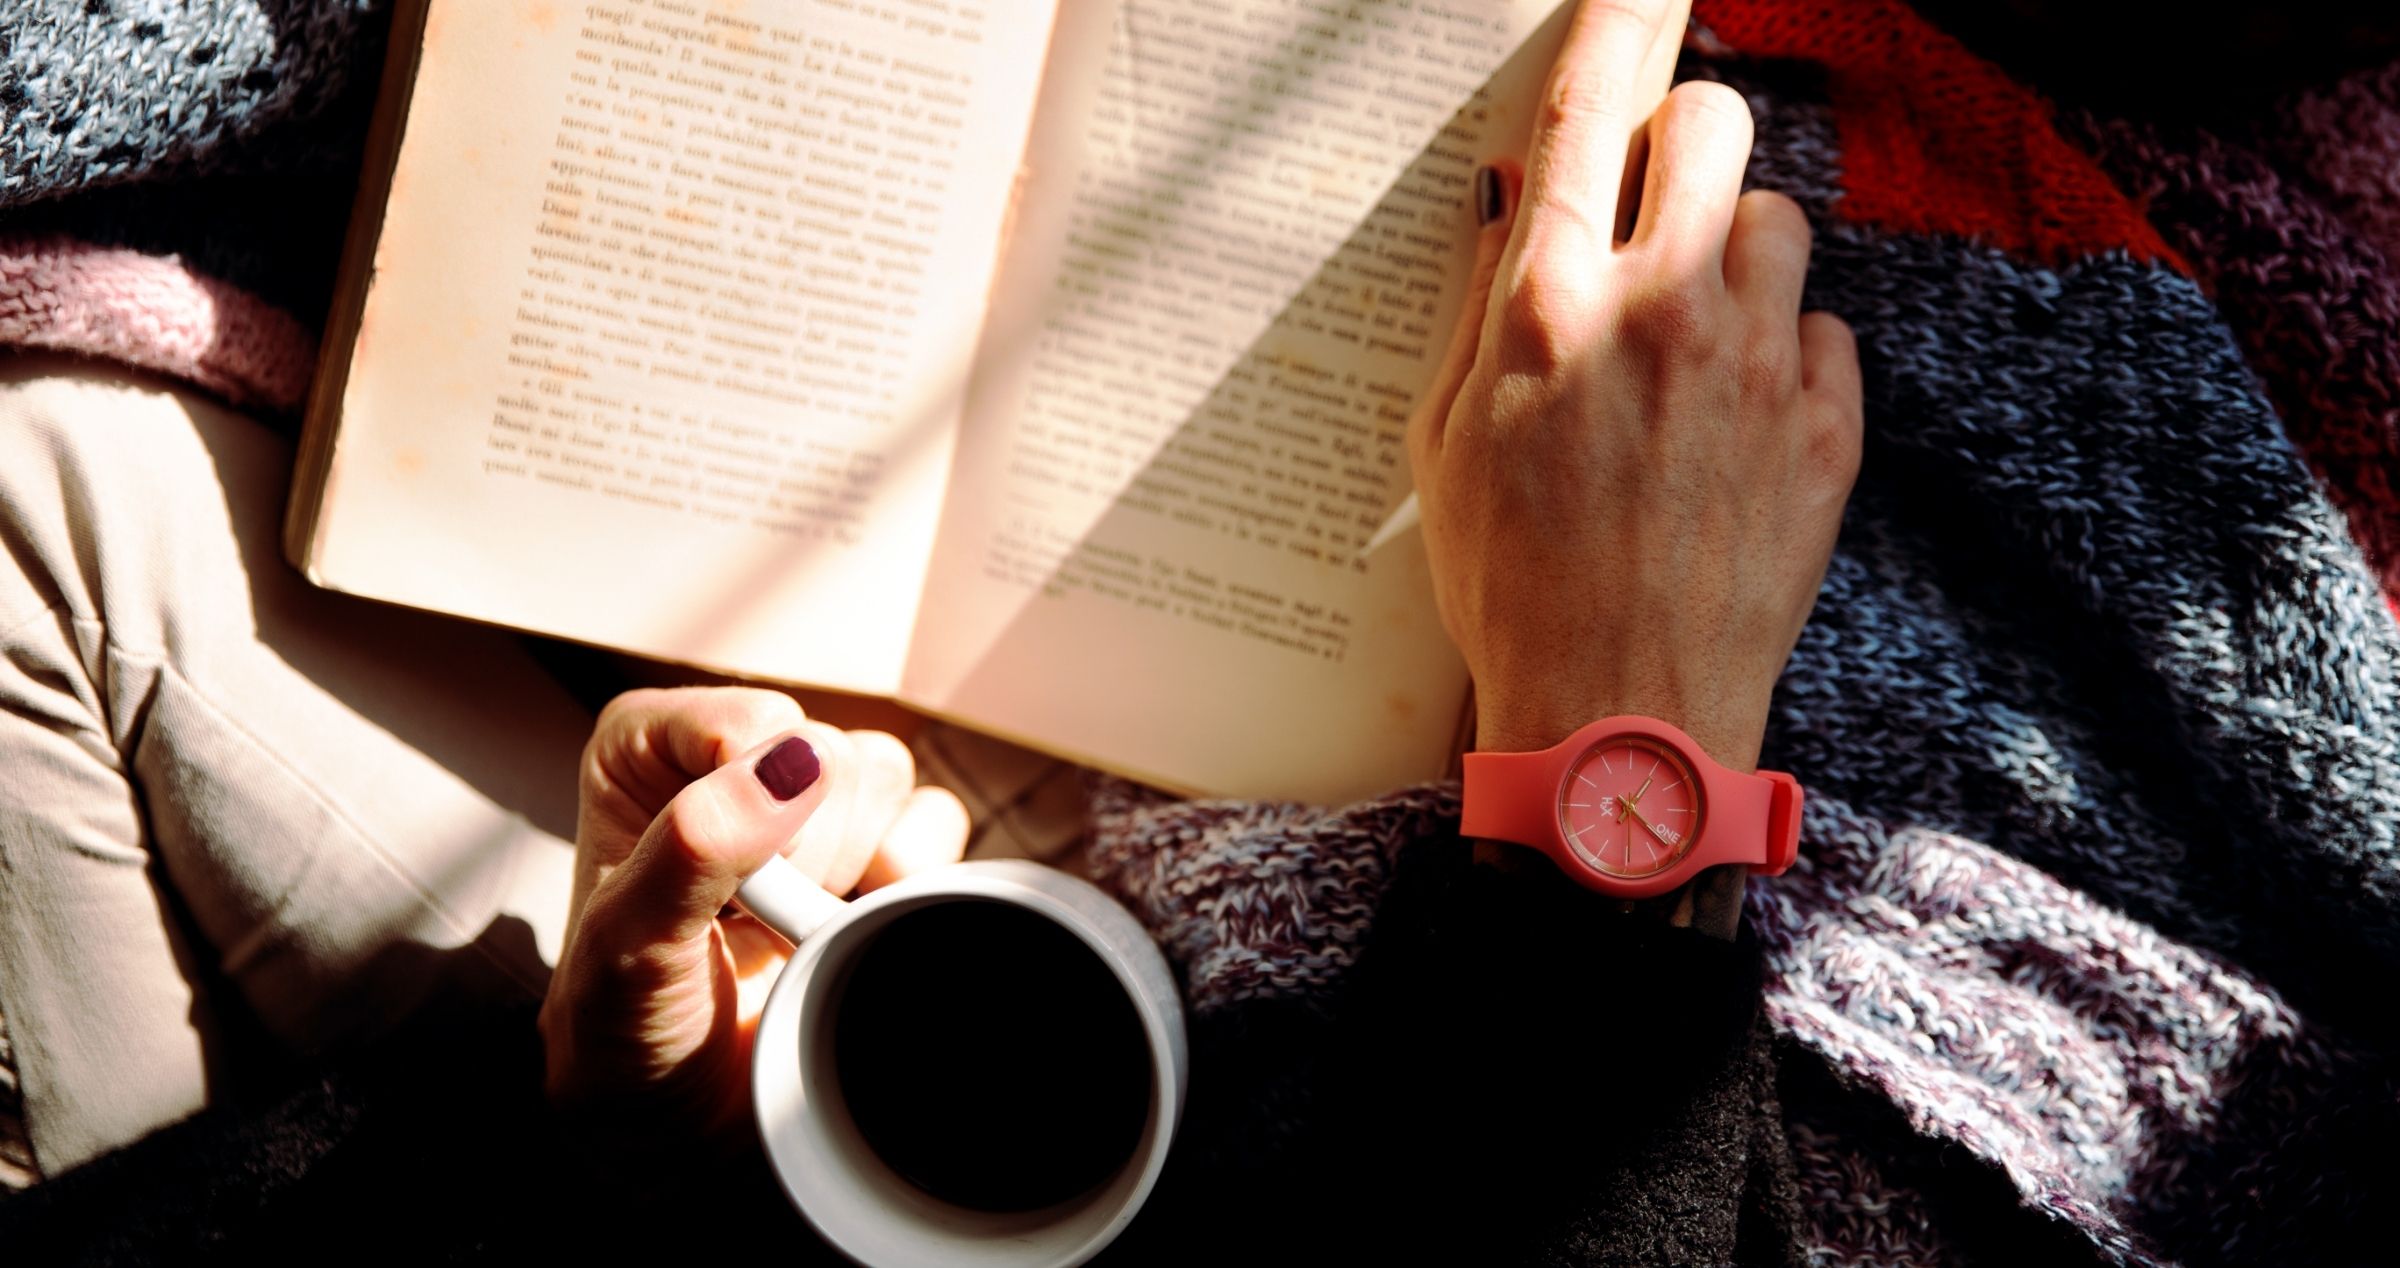 Female hands holding a book and a cup of coffee